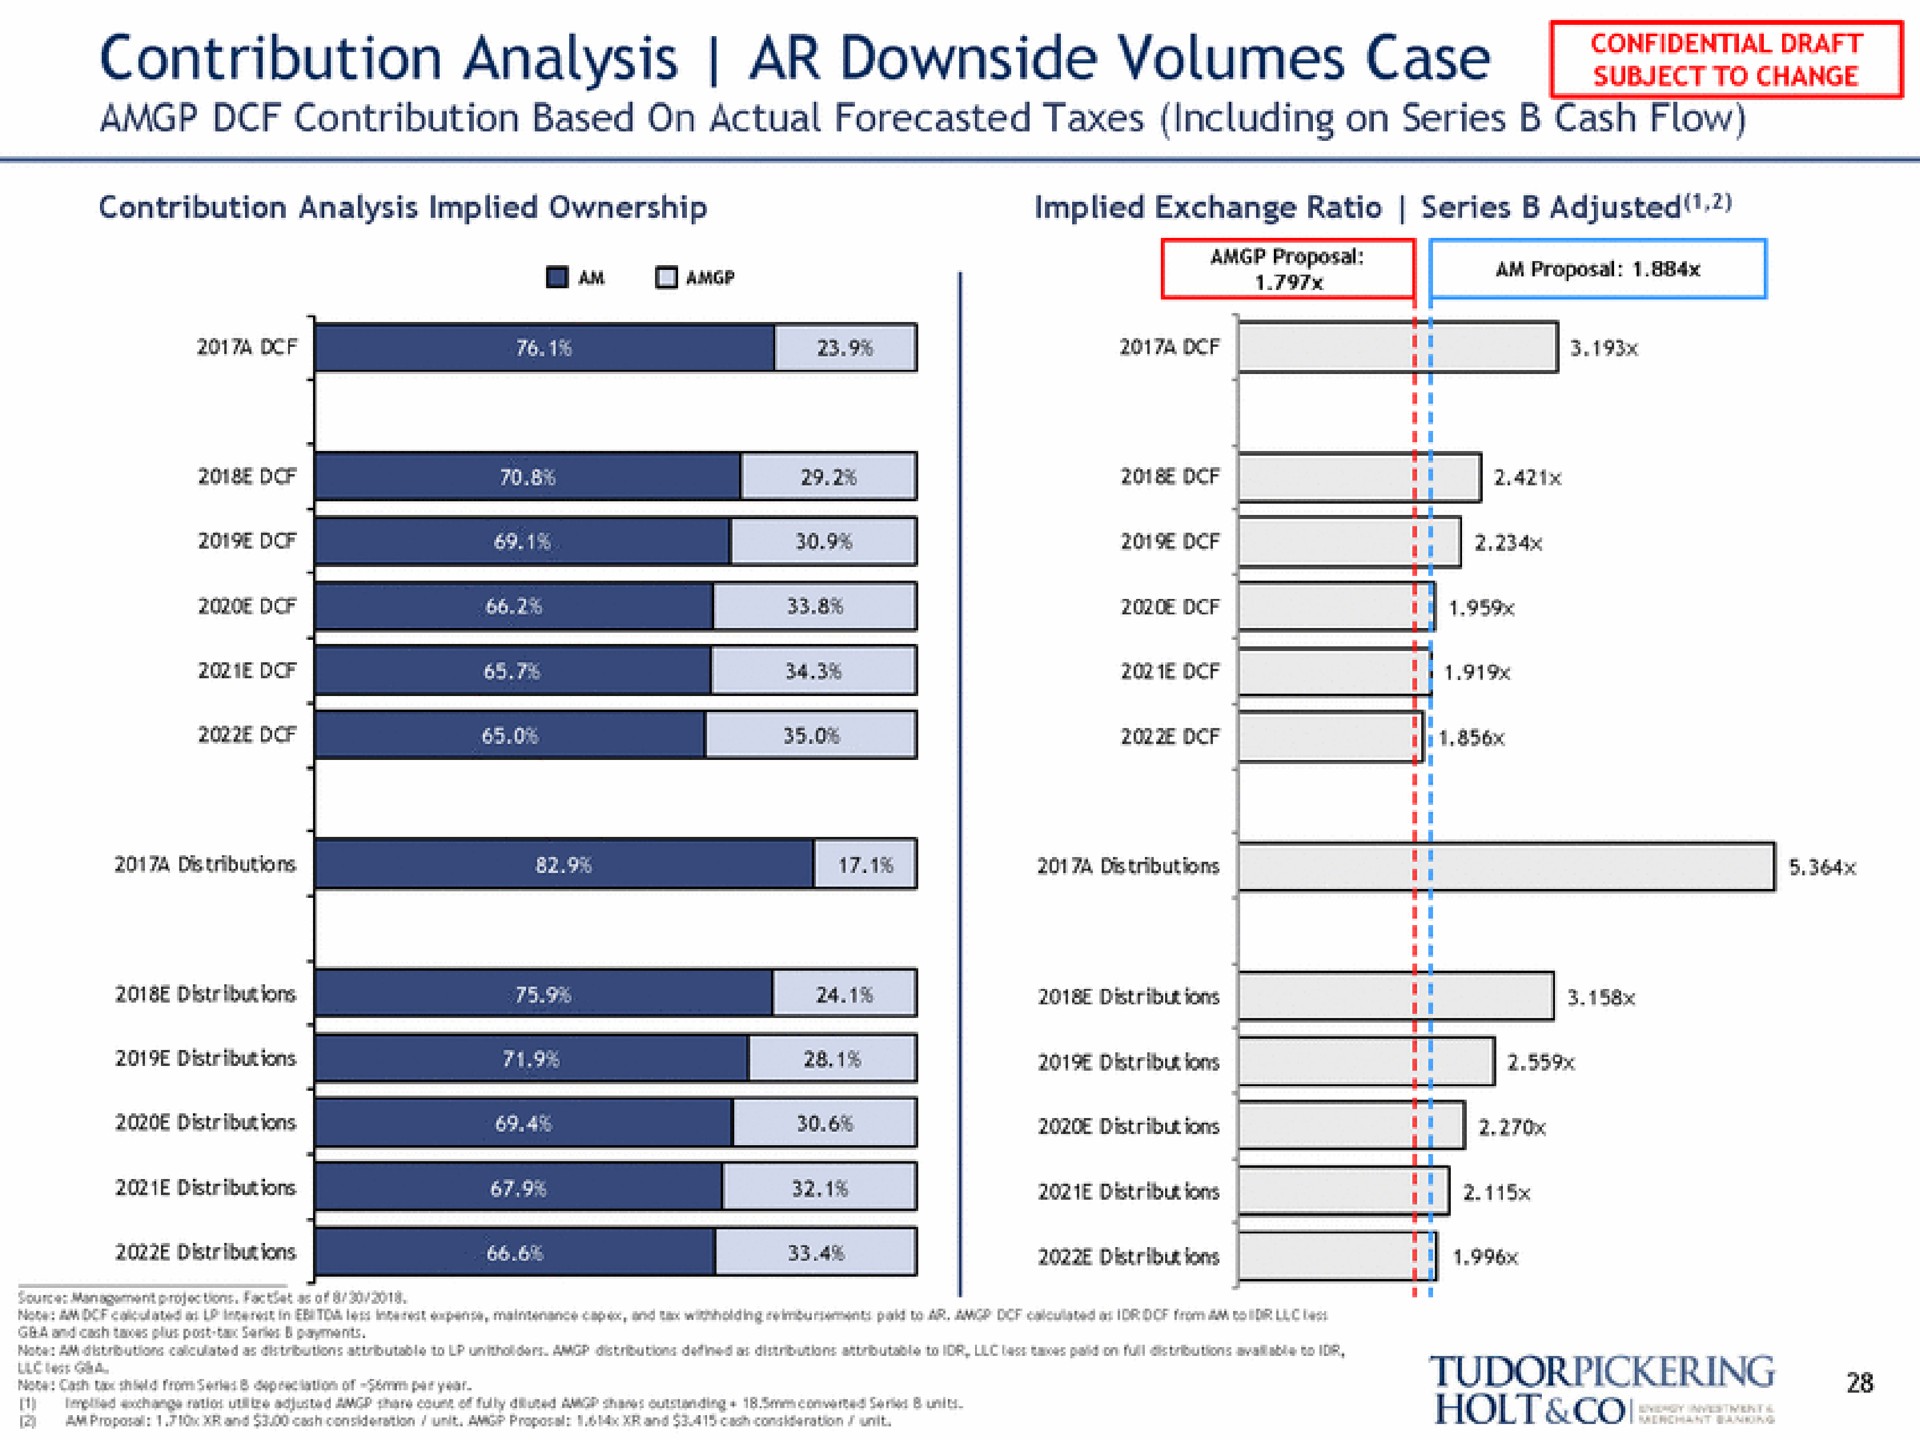 contribution analysis downside volumes case a | Tudor, Pickering, Holt & Co